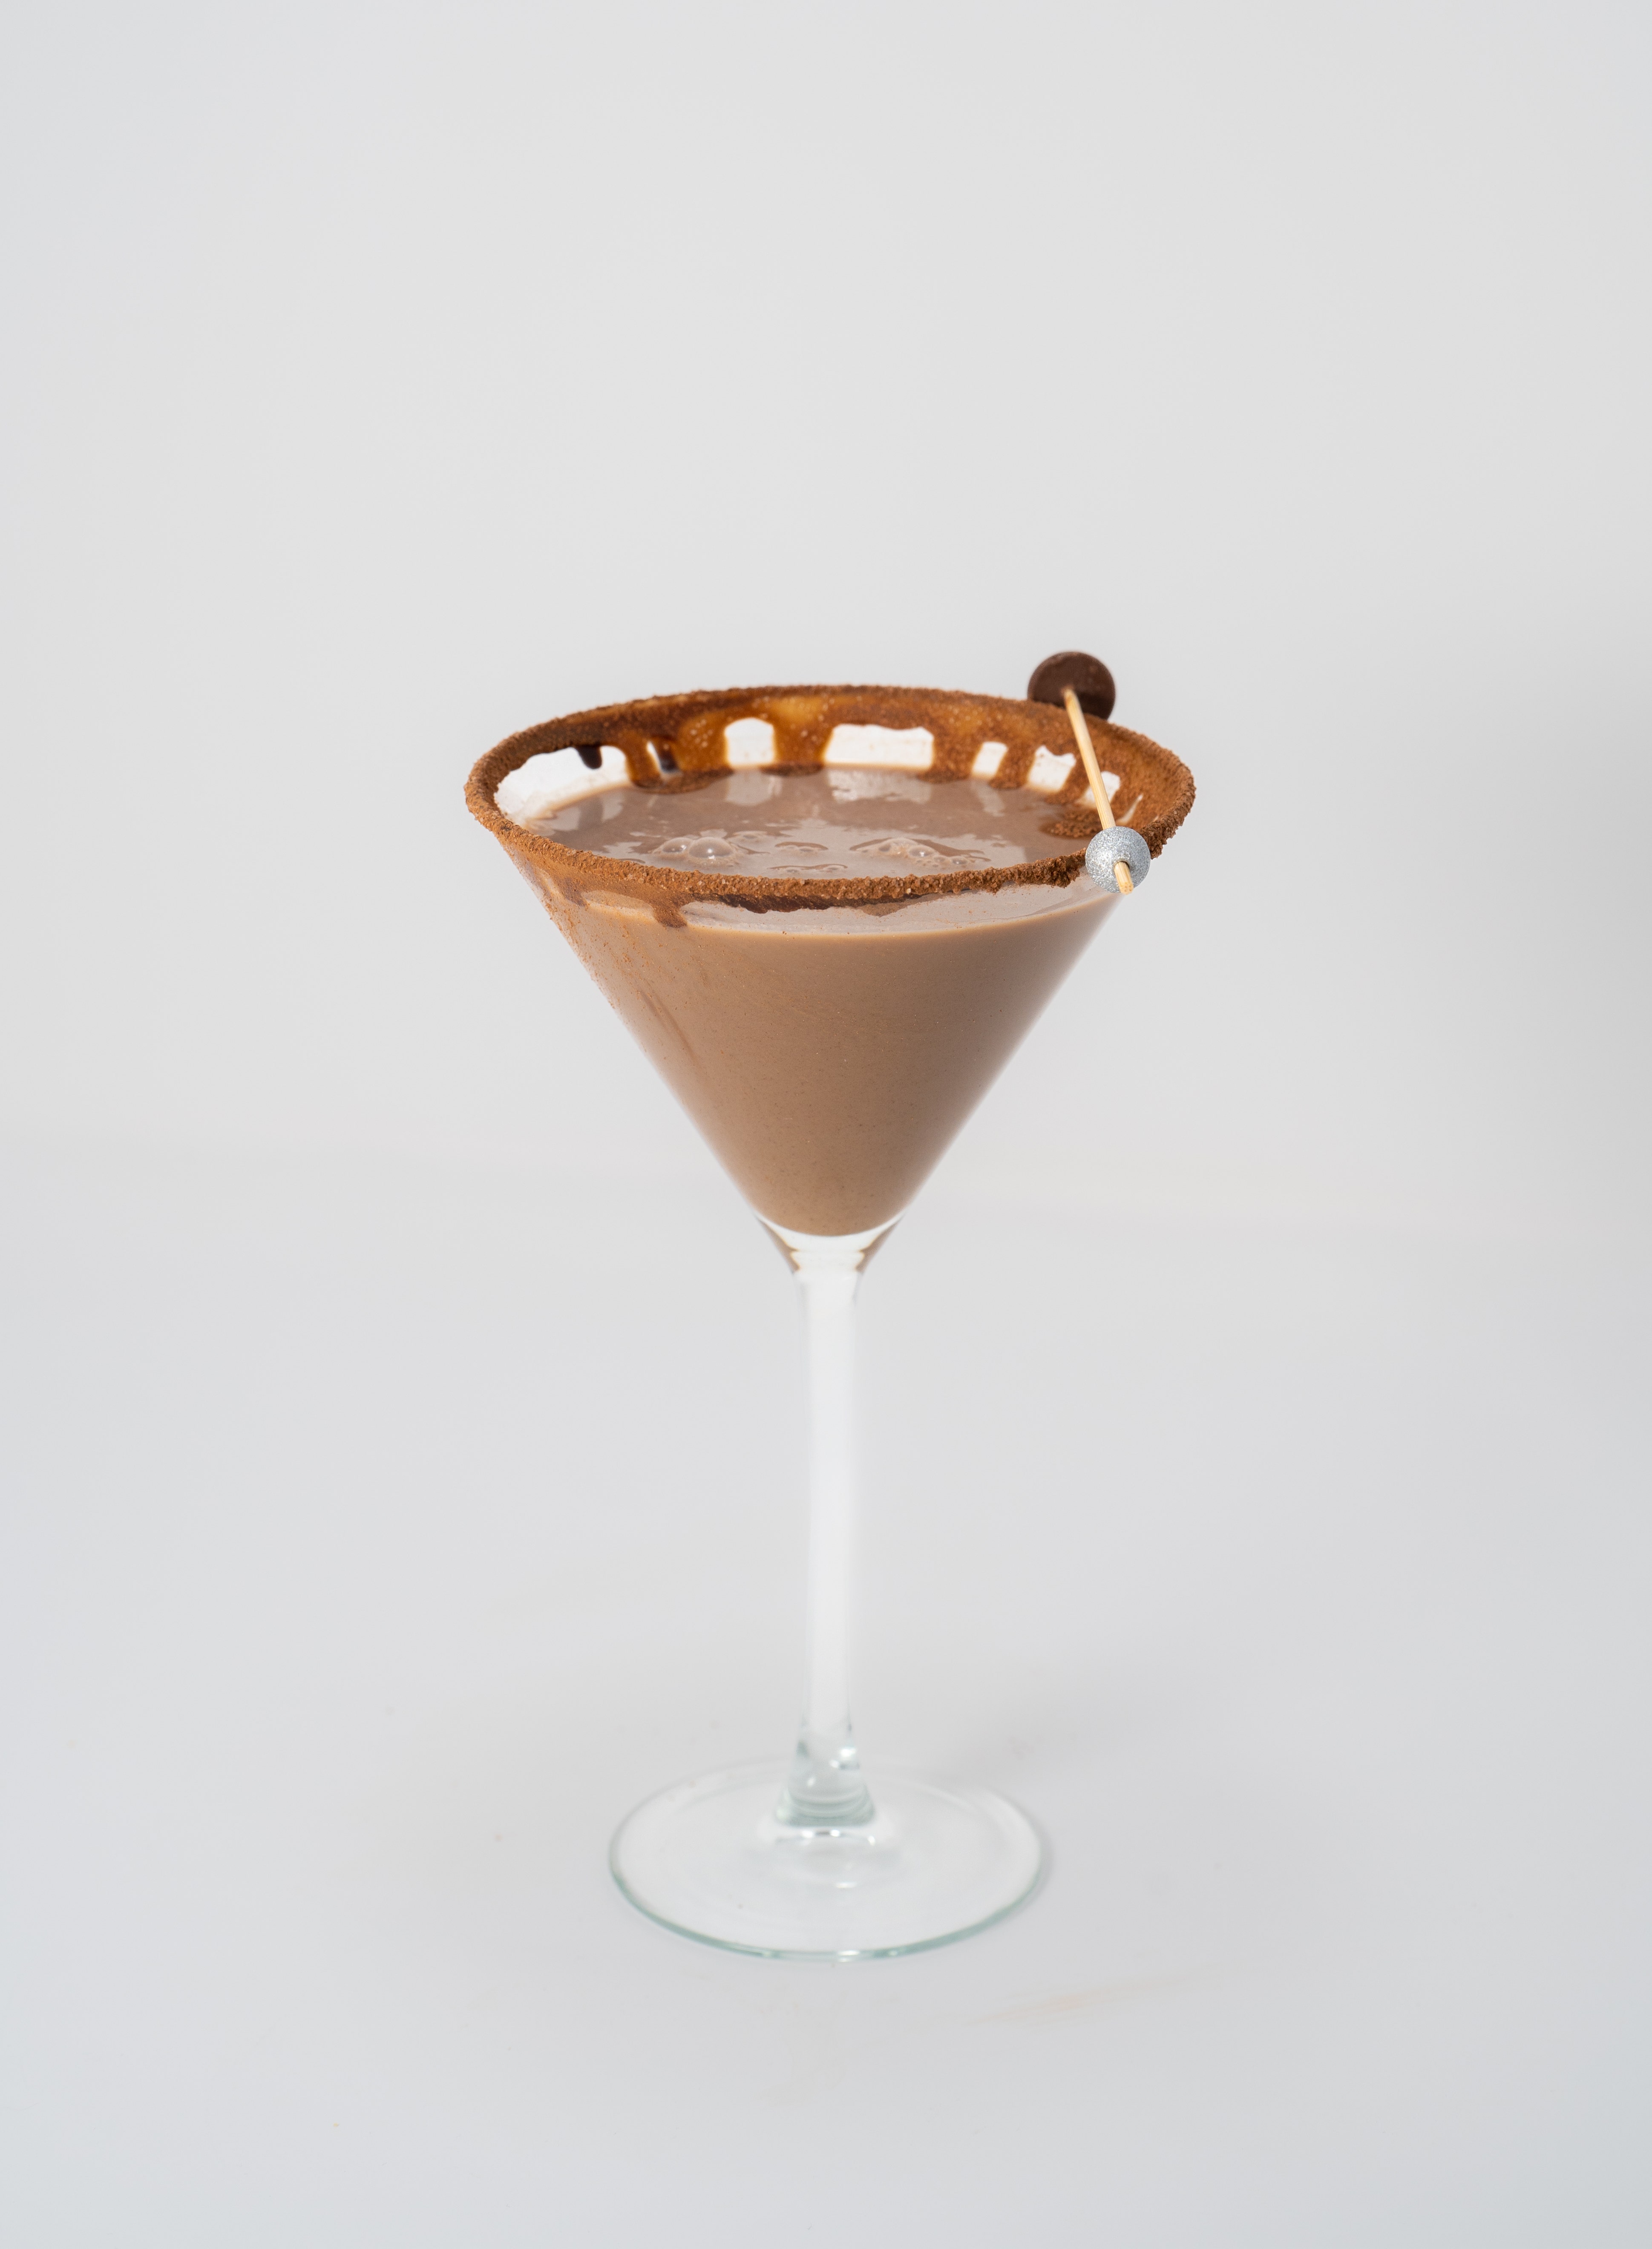 Commercial Chocolate Martini With Chocolate Rim and Stirer